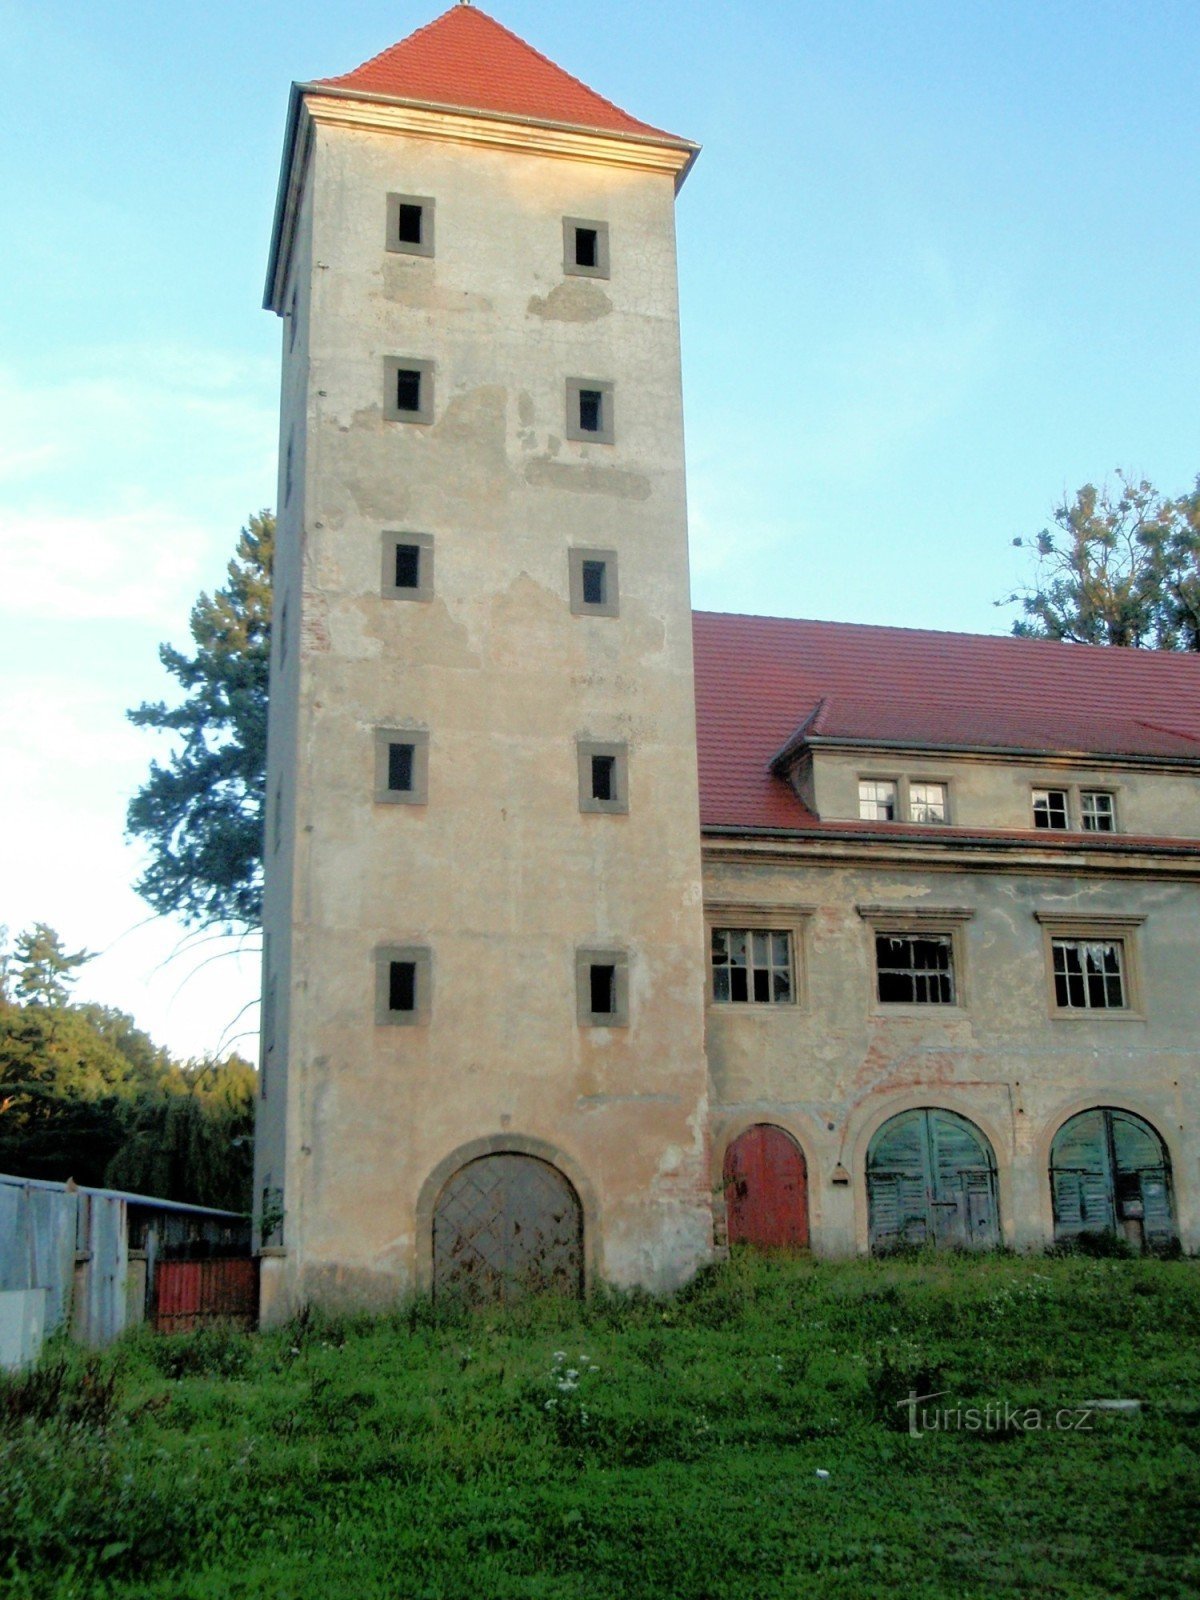 Tower and almshouse with hospital